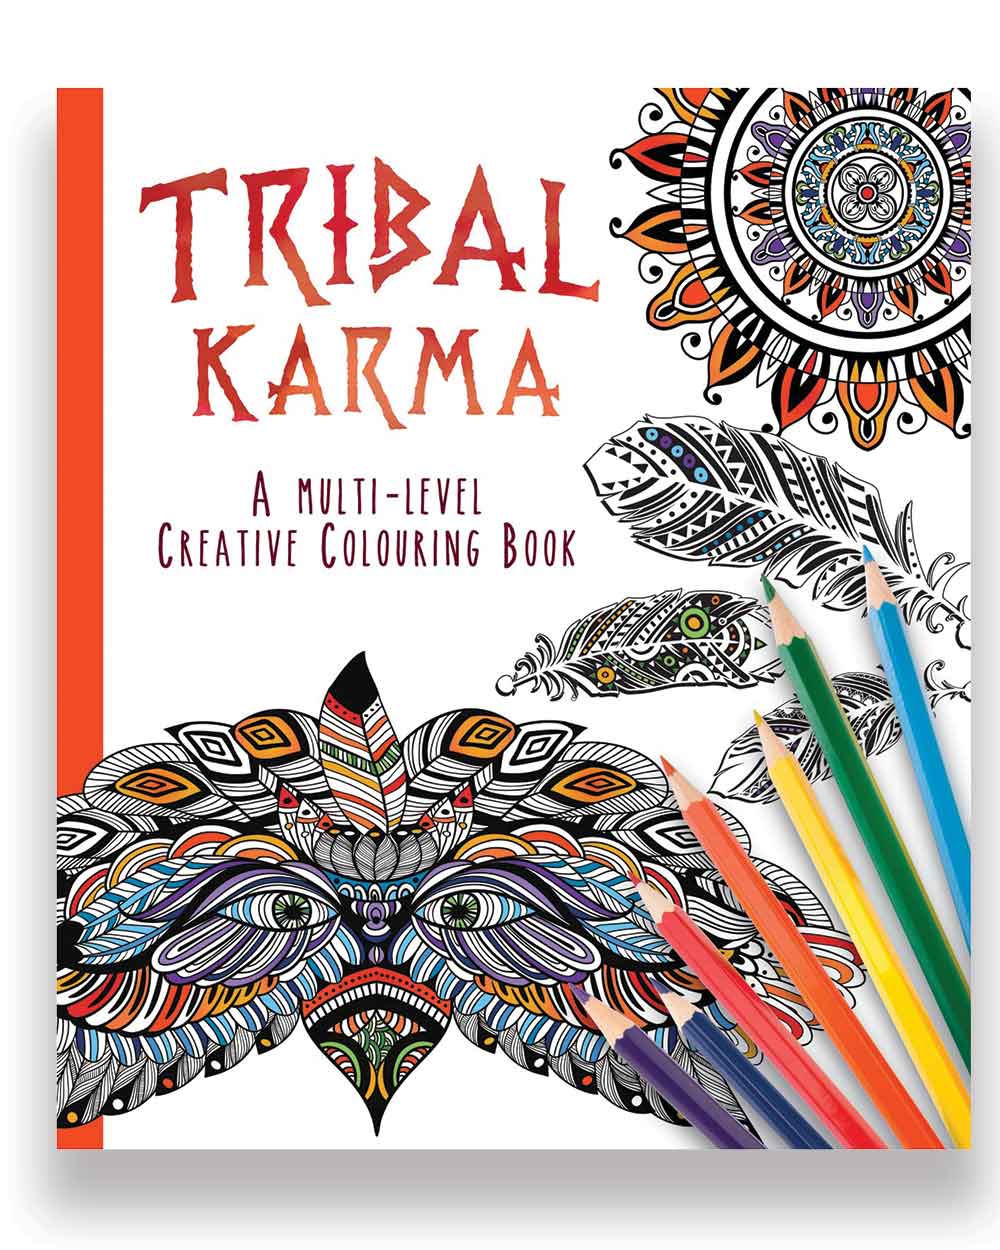 Tribal karma colouring book for adults and children front cover on a white back ground